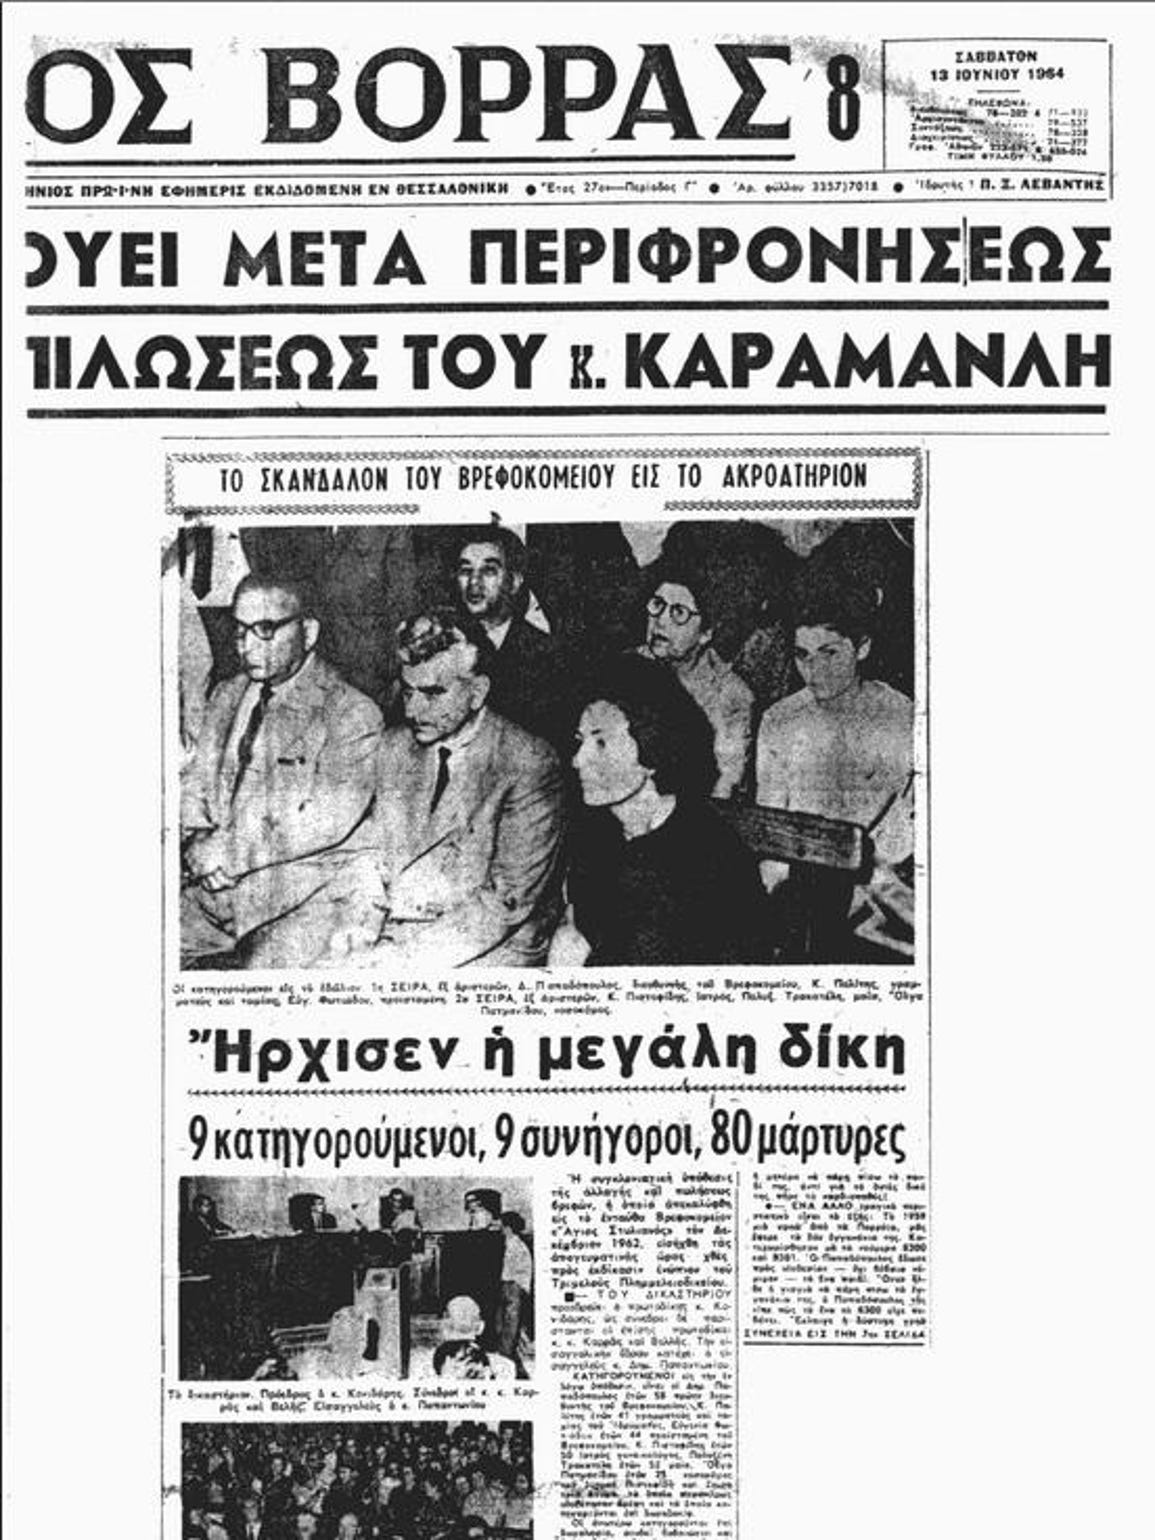 The cover story of the June 13, 1964, edition of “Greek